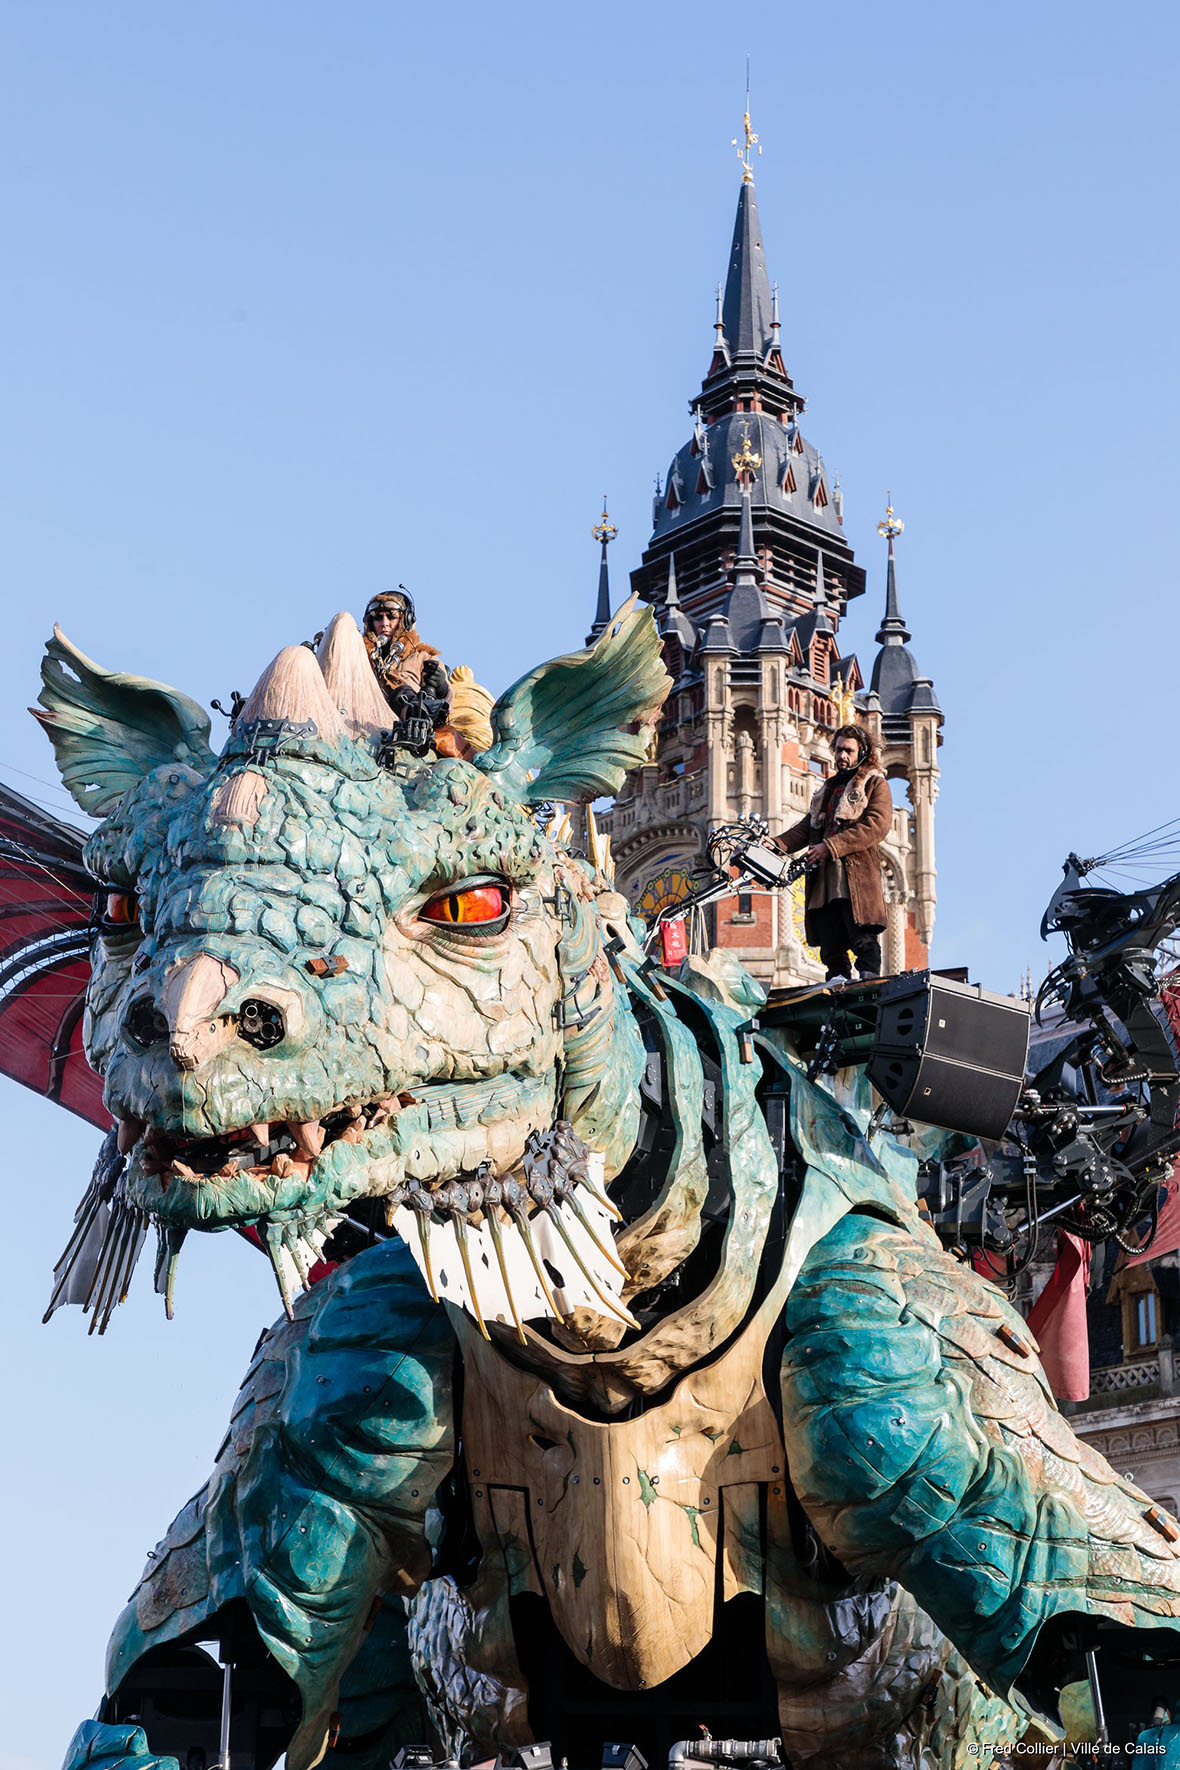 A large mechanical and colourful dragon, in front of Calais Town Hall.